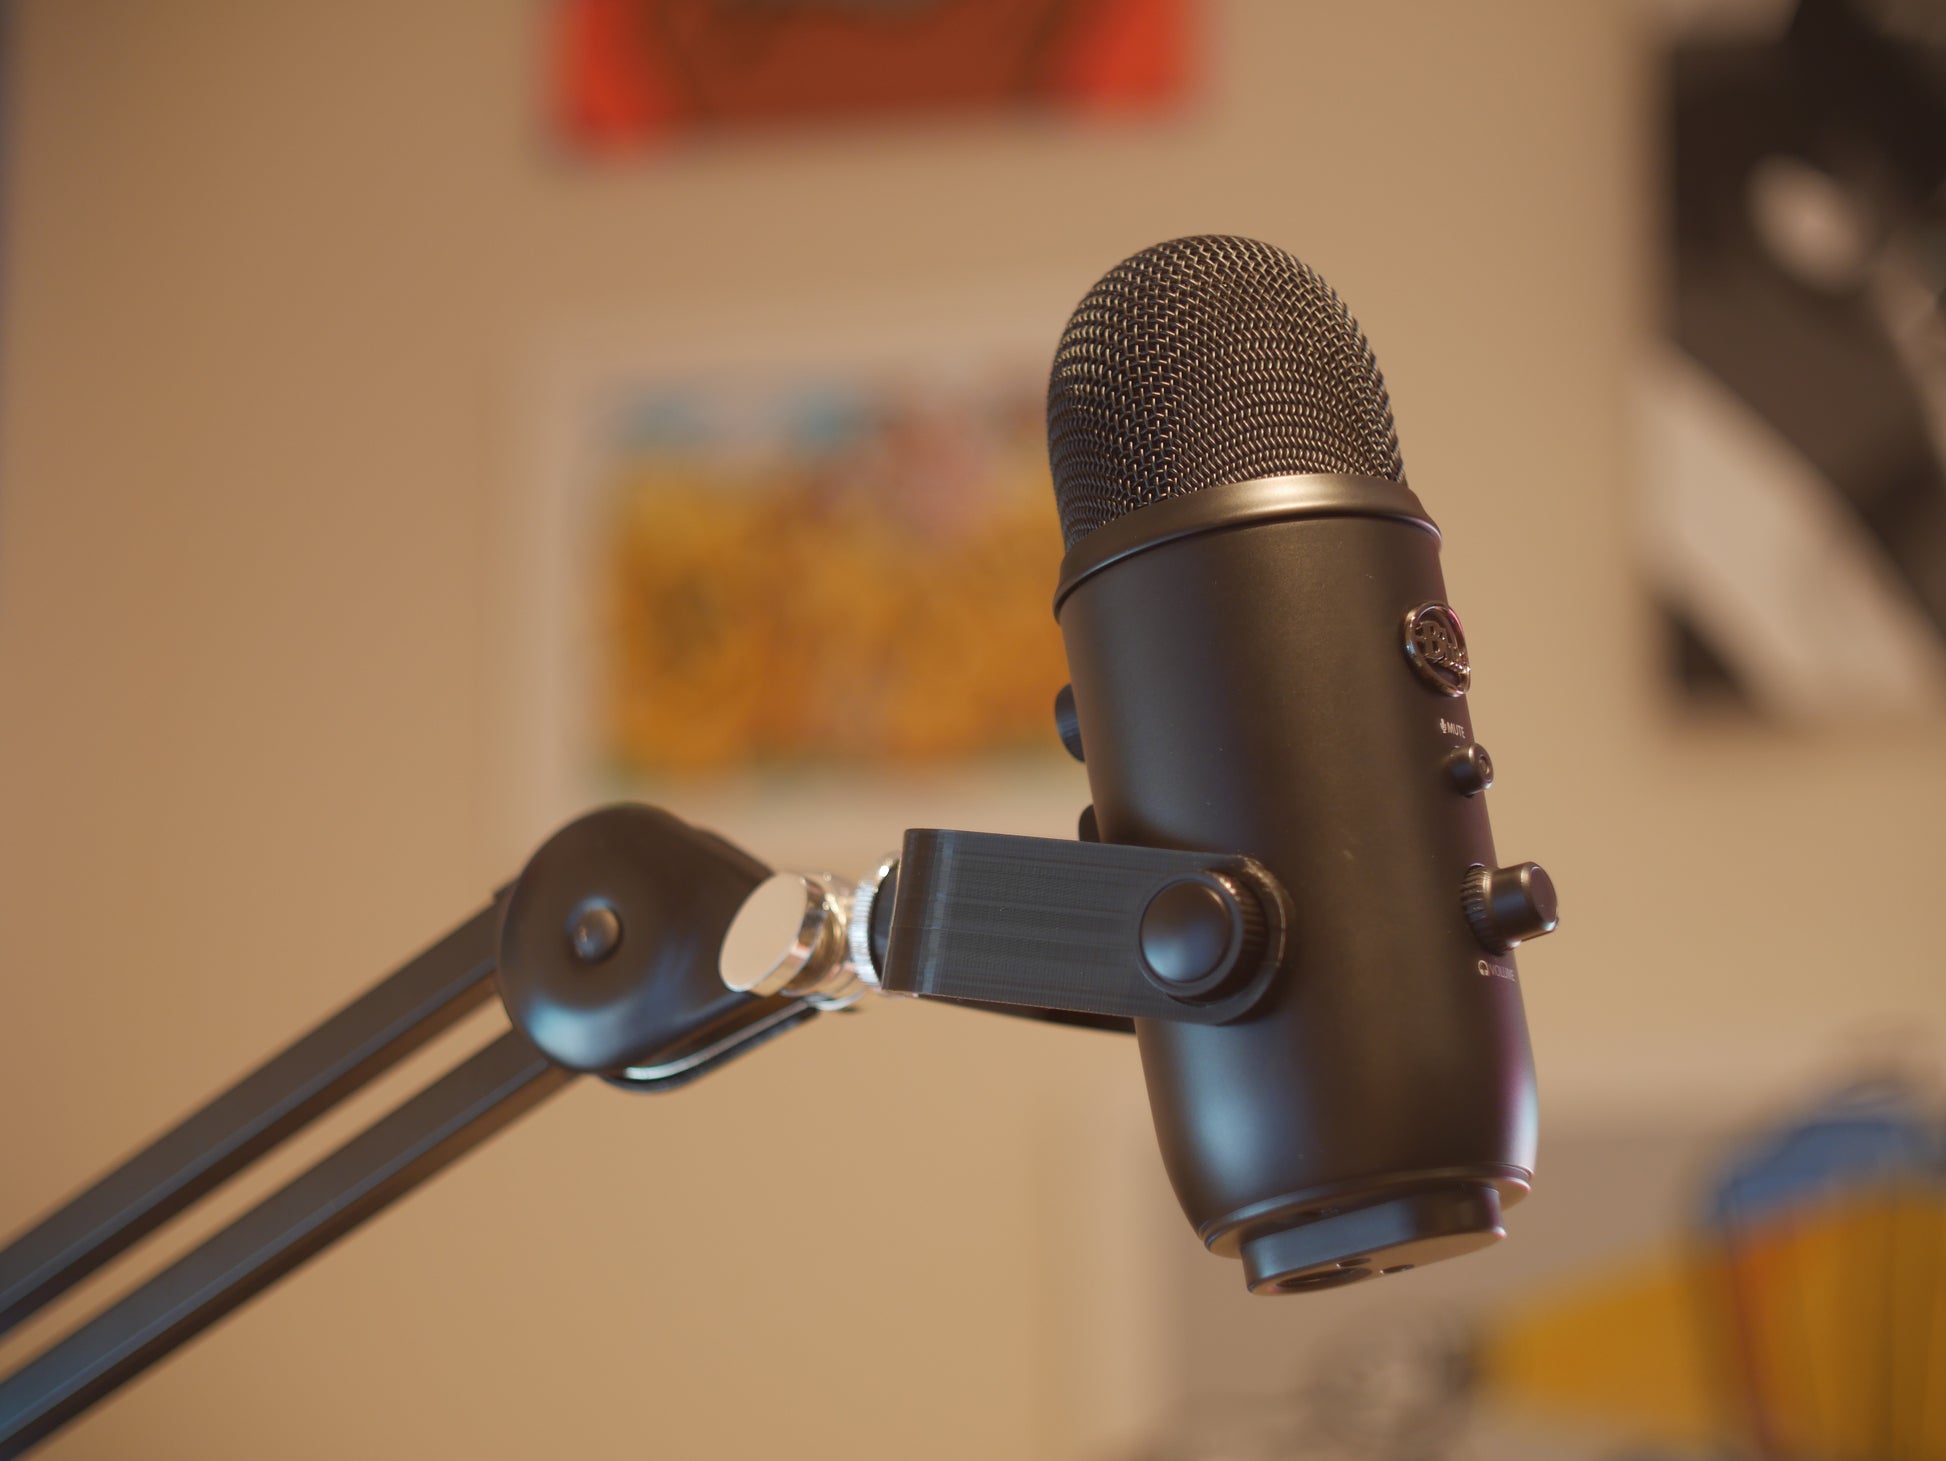 A black microphone mount attached to a boom arm and holding a Blue Yeti microphone.